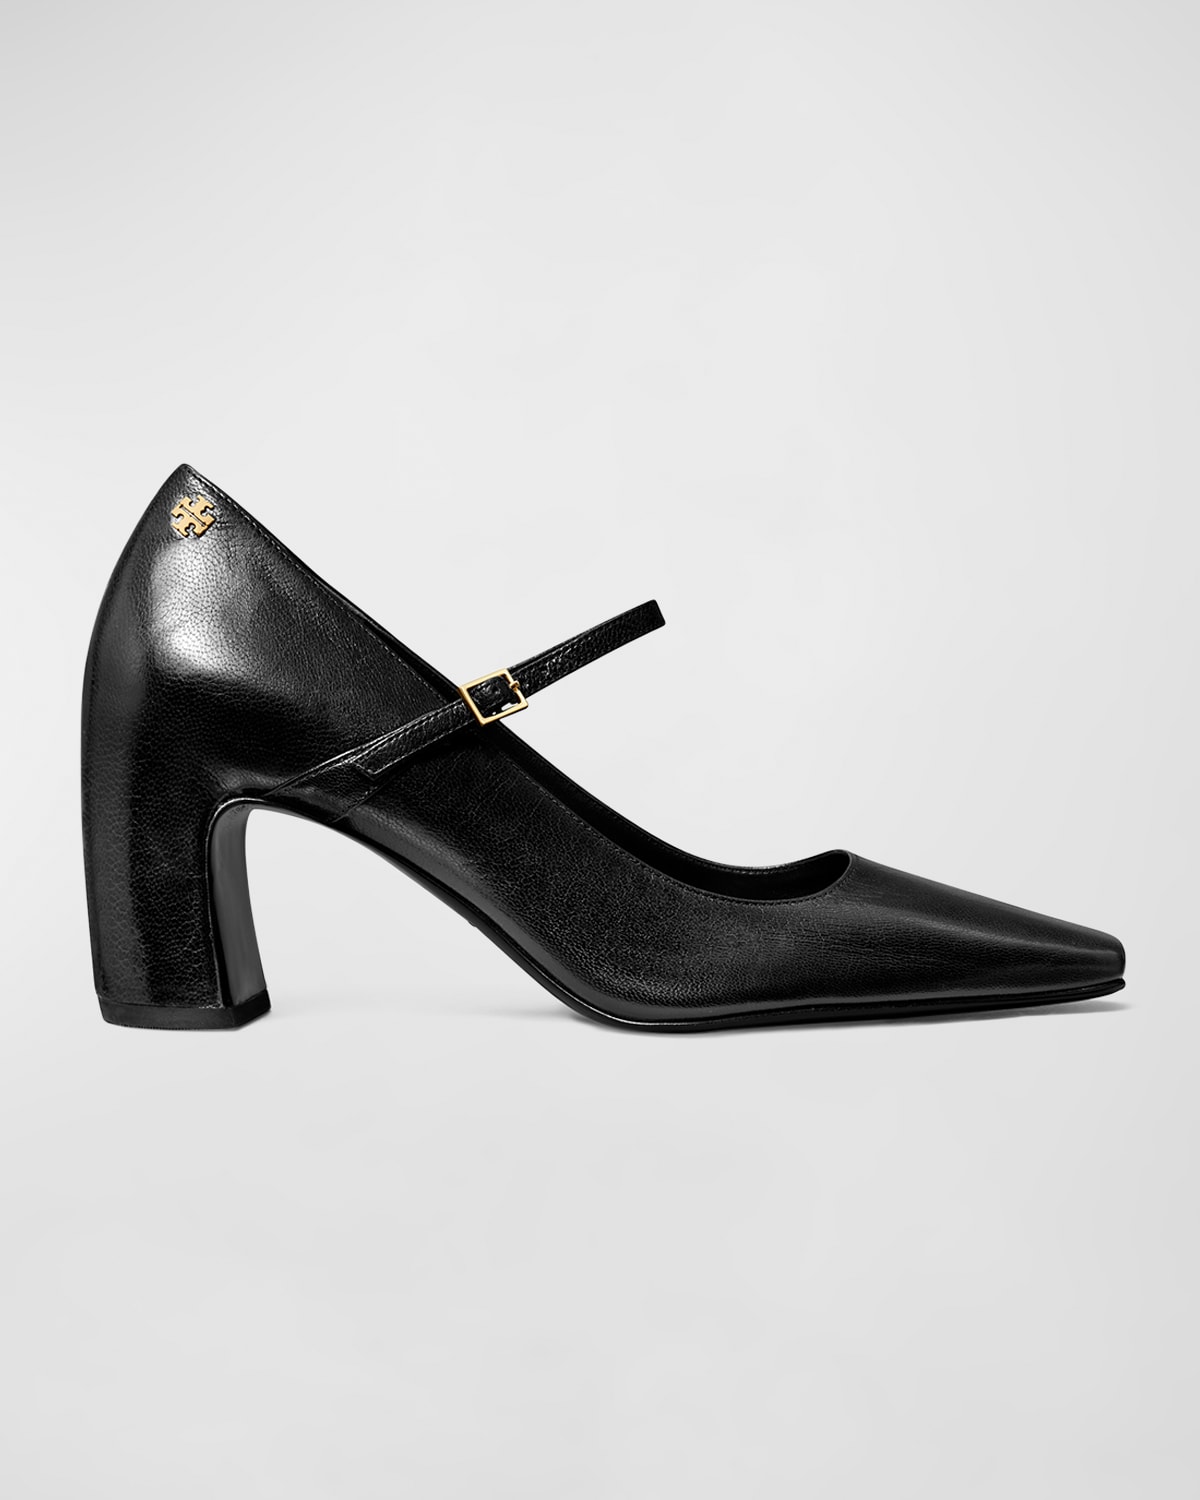 Tory Burch Banana Leather Mary Jane Pumps In Perfect Black